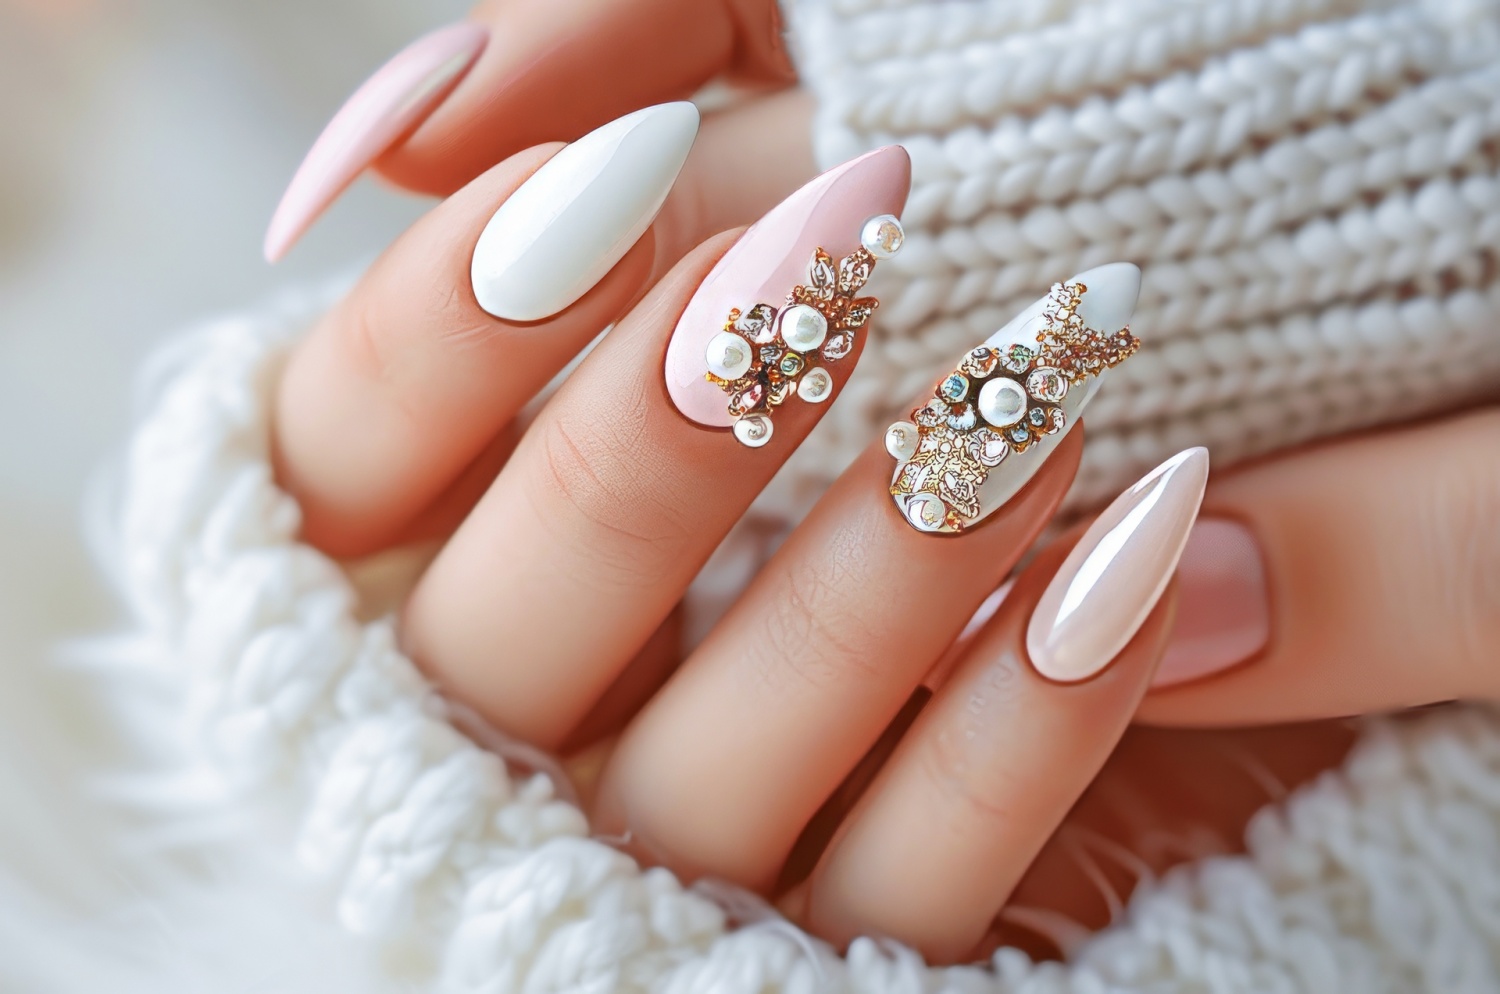 Rhinestone Nails: How to Use and Remove Safely